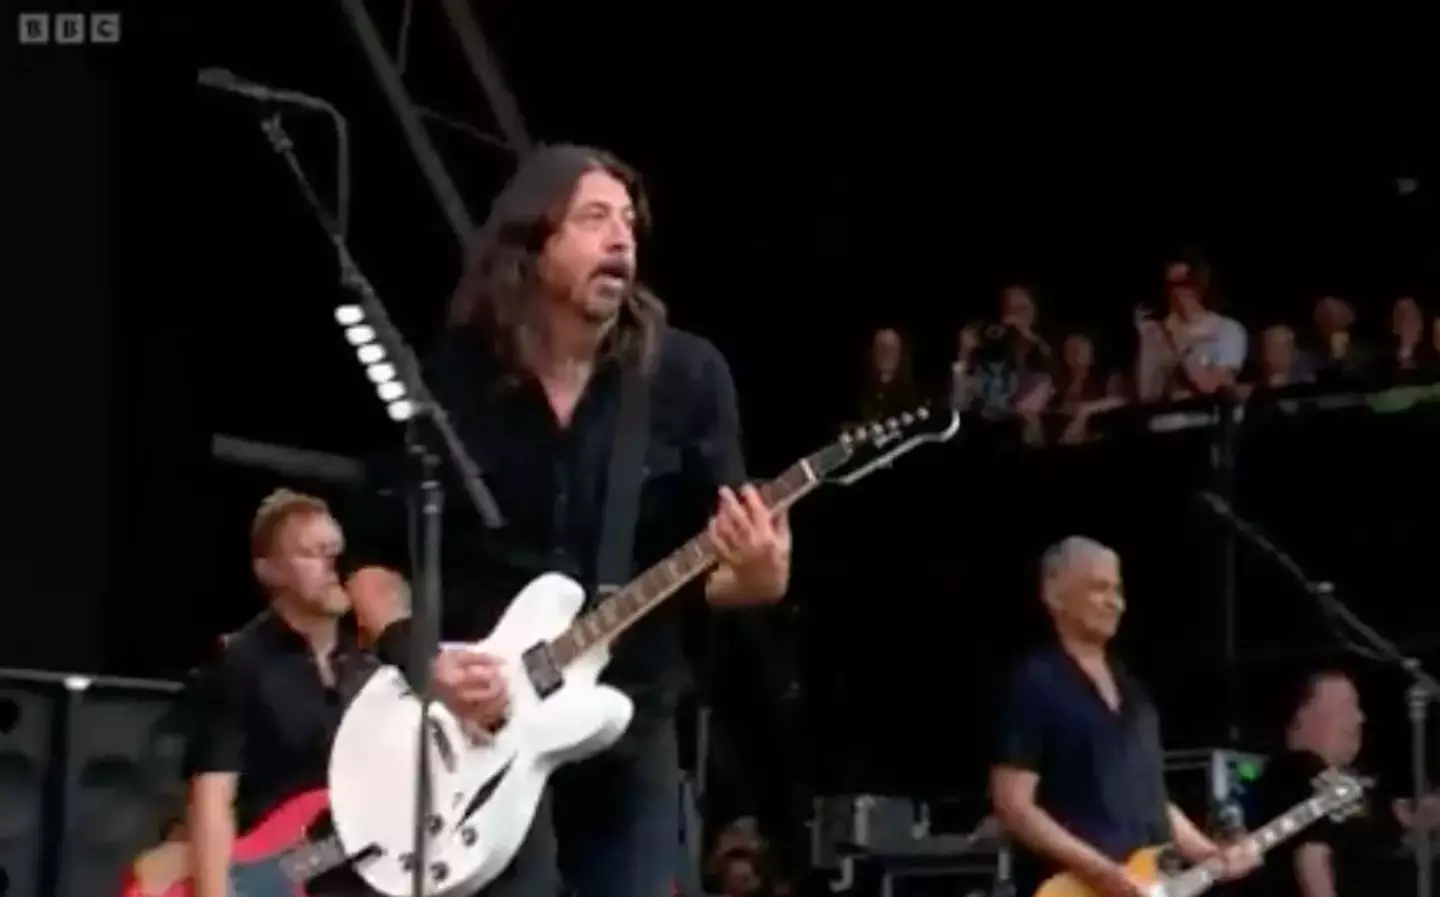 It was the Foo Fighters all along!